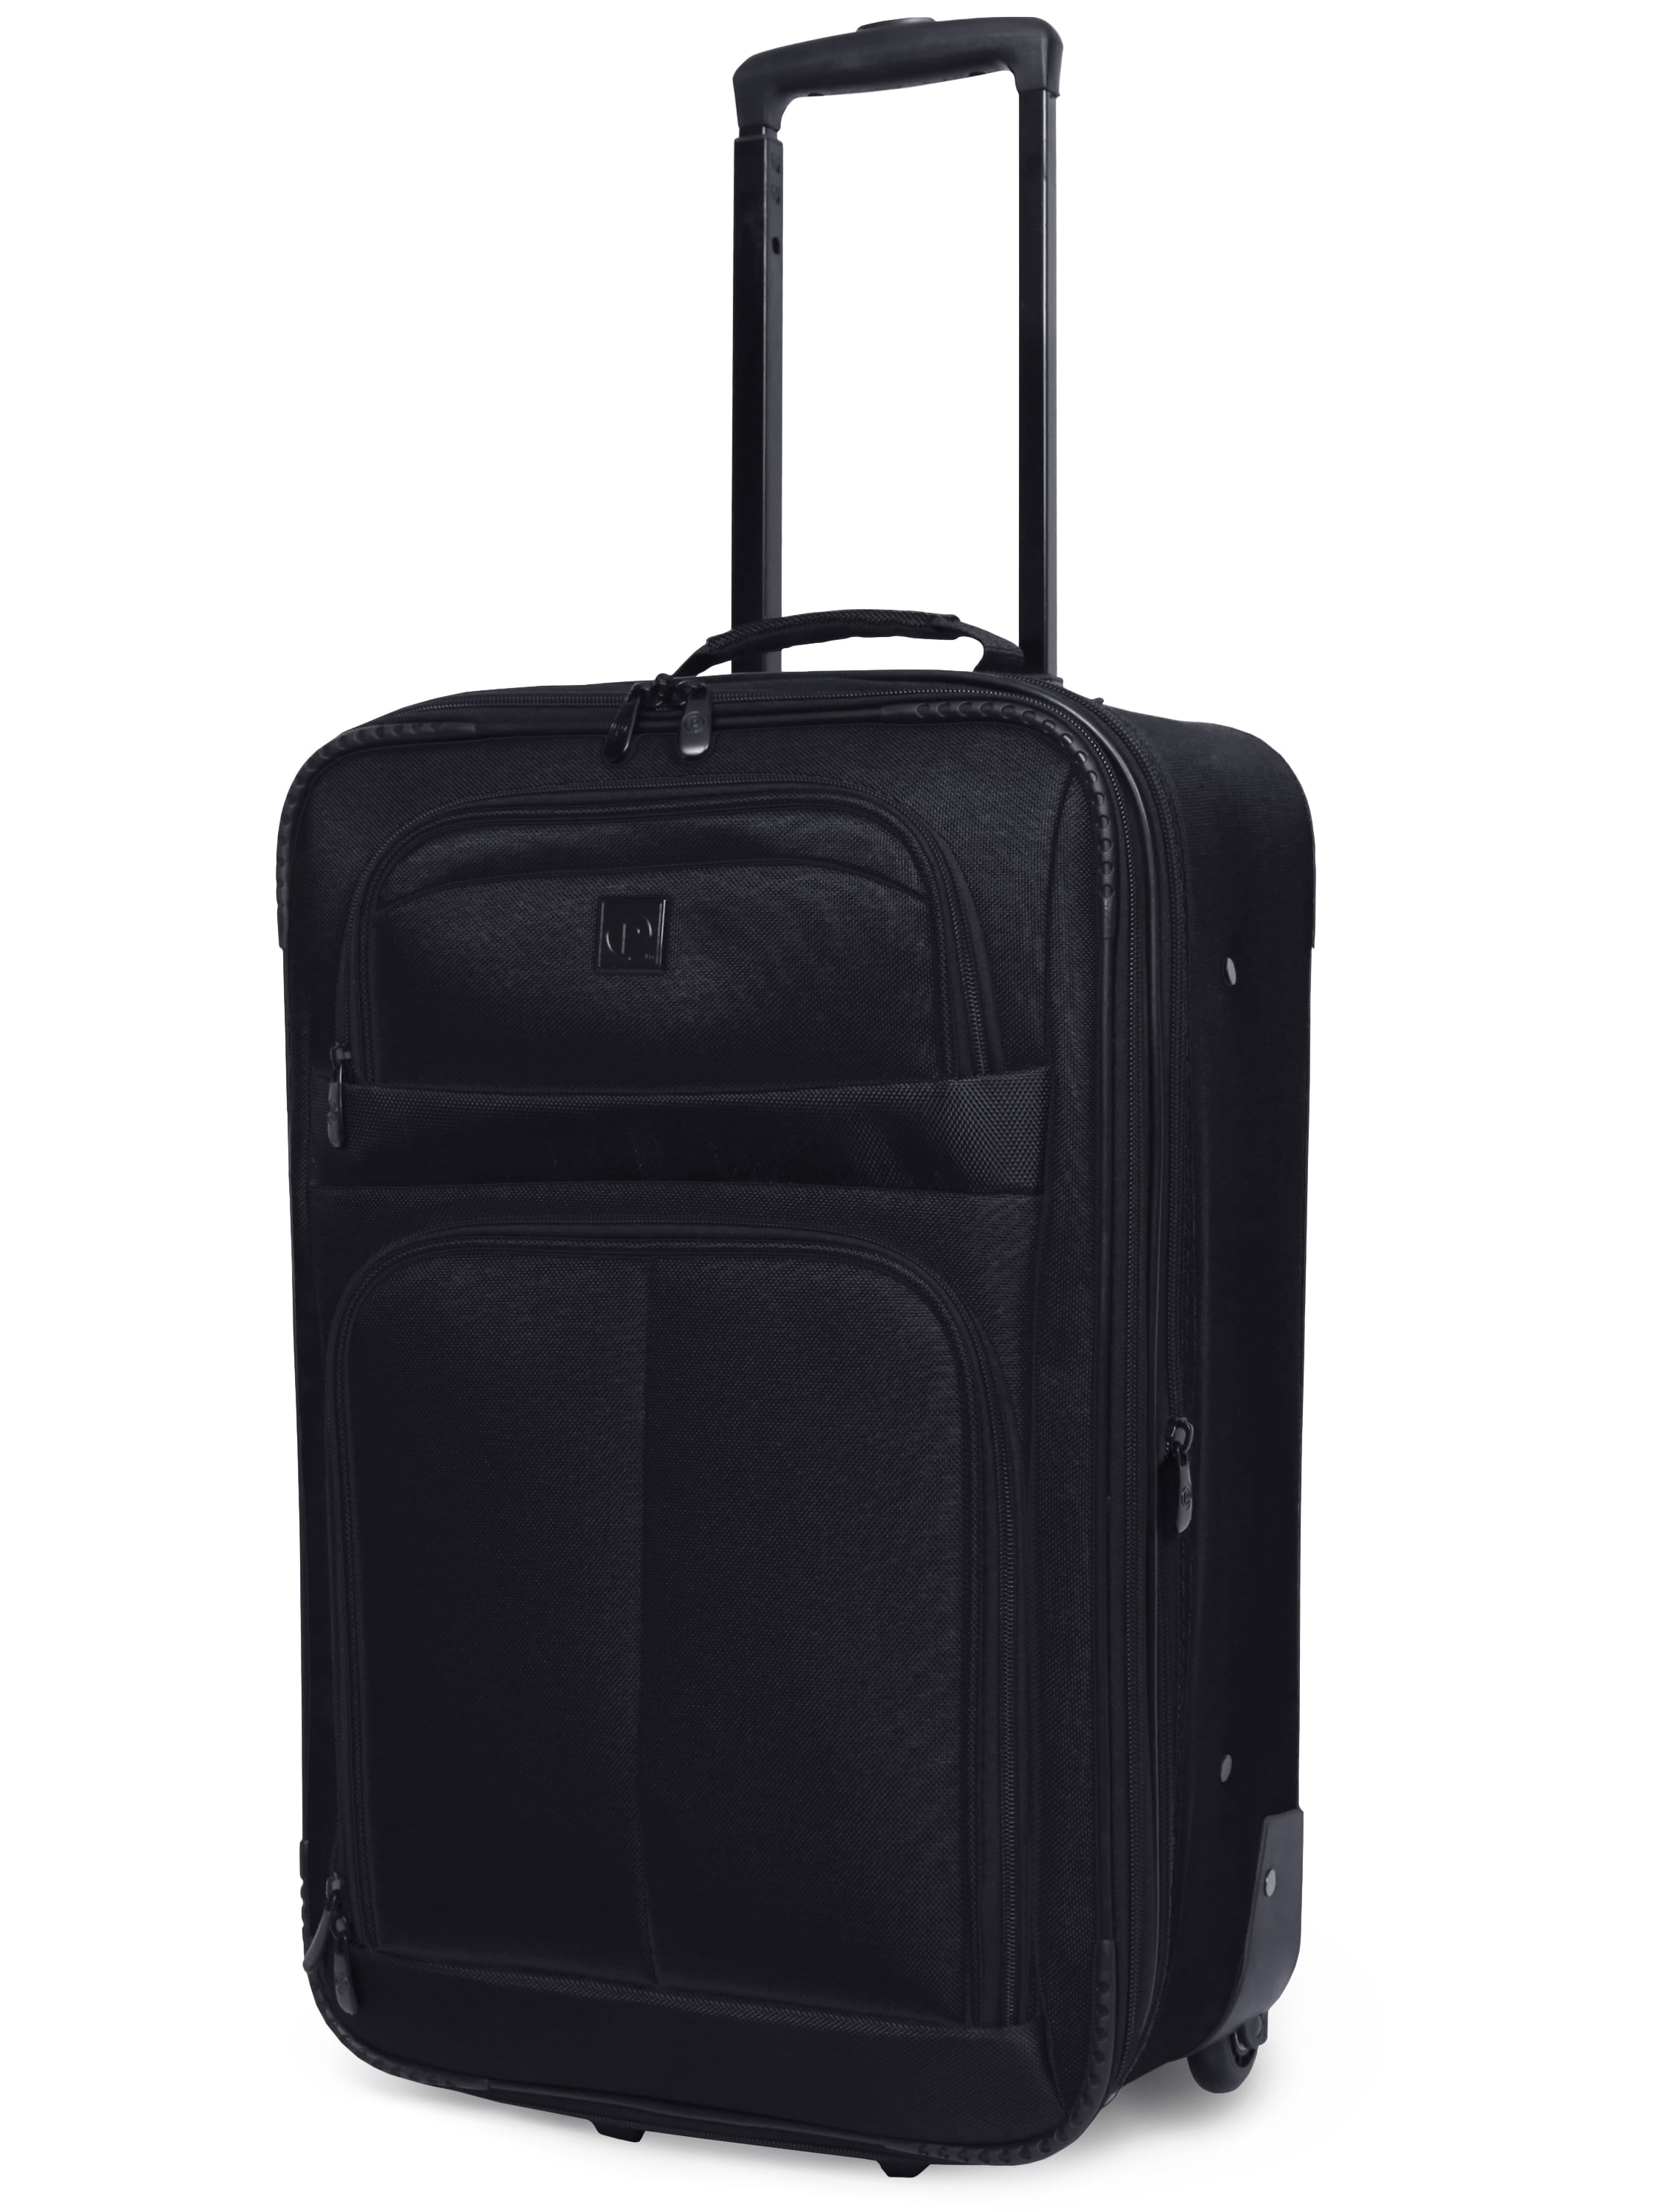 protege luggage prices